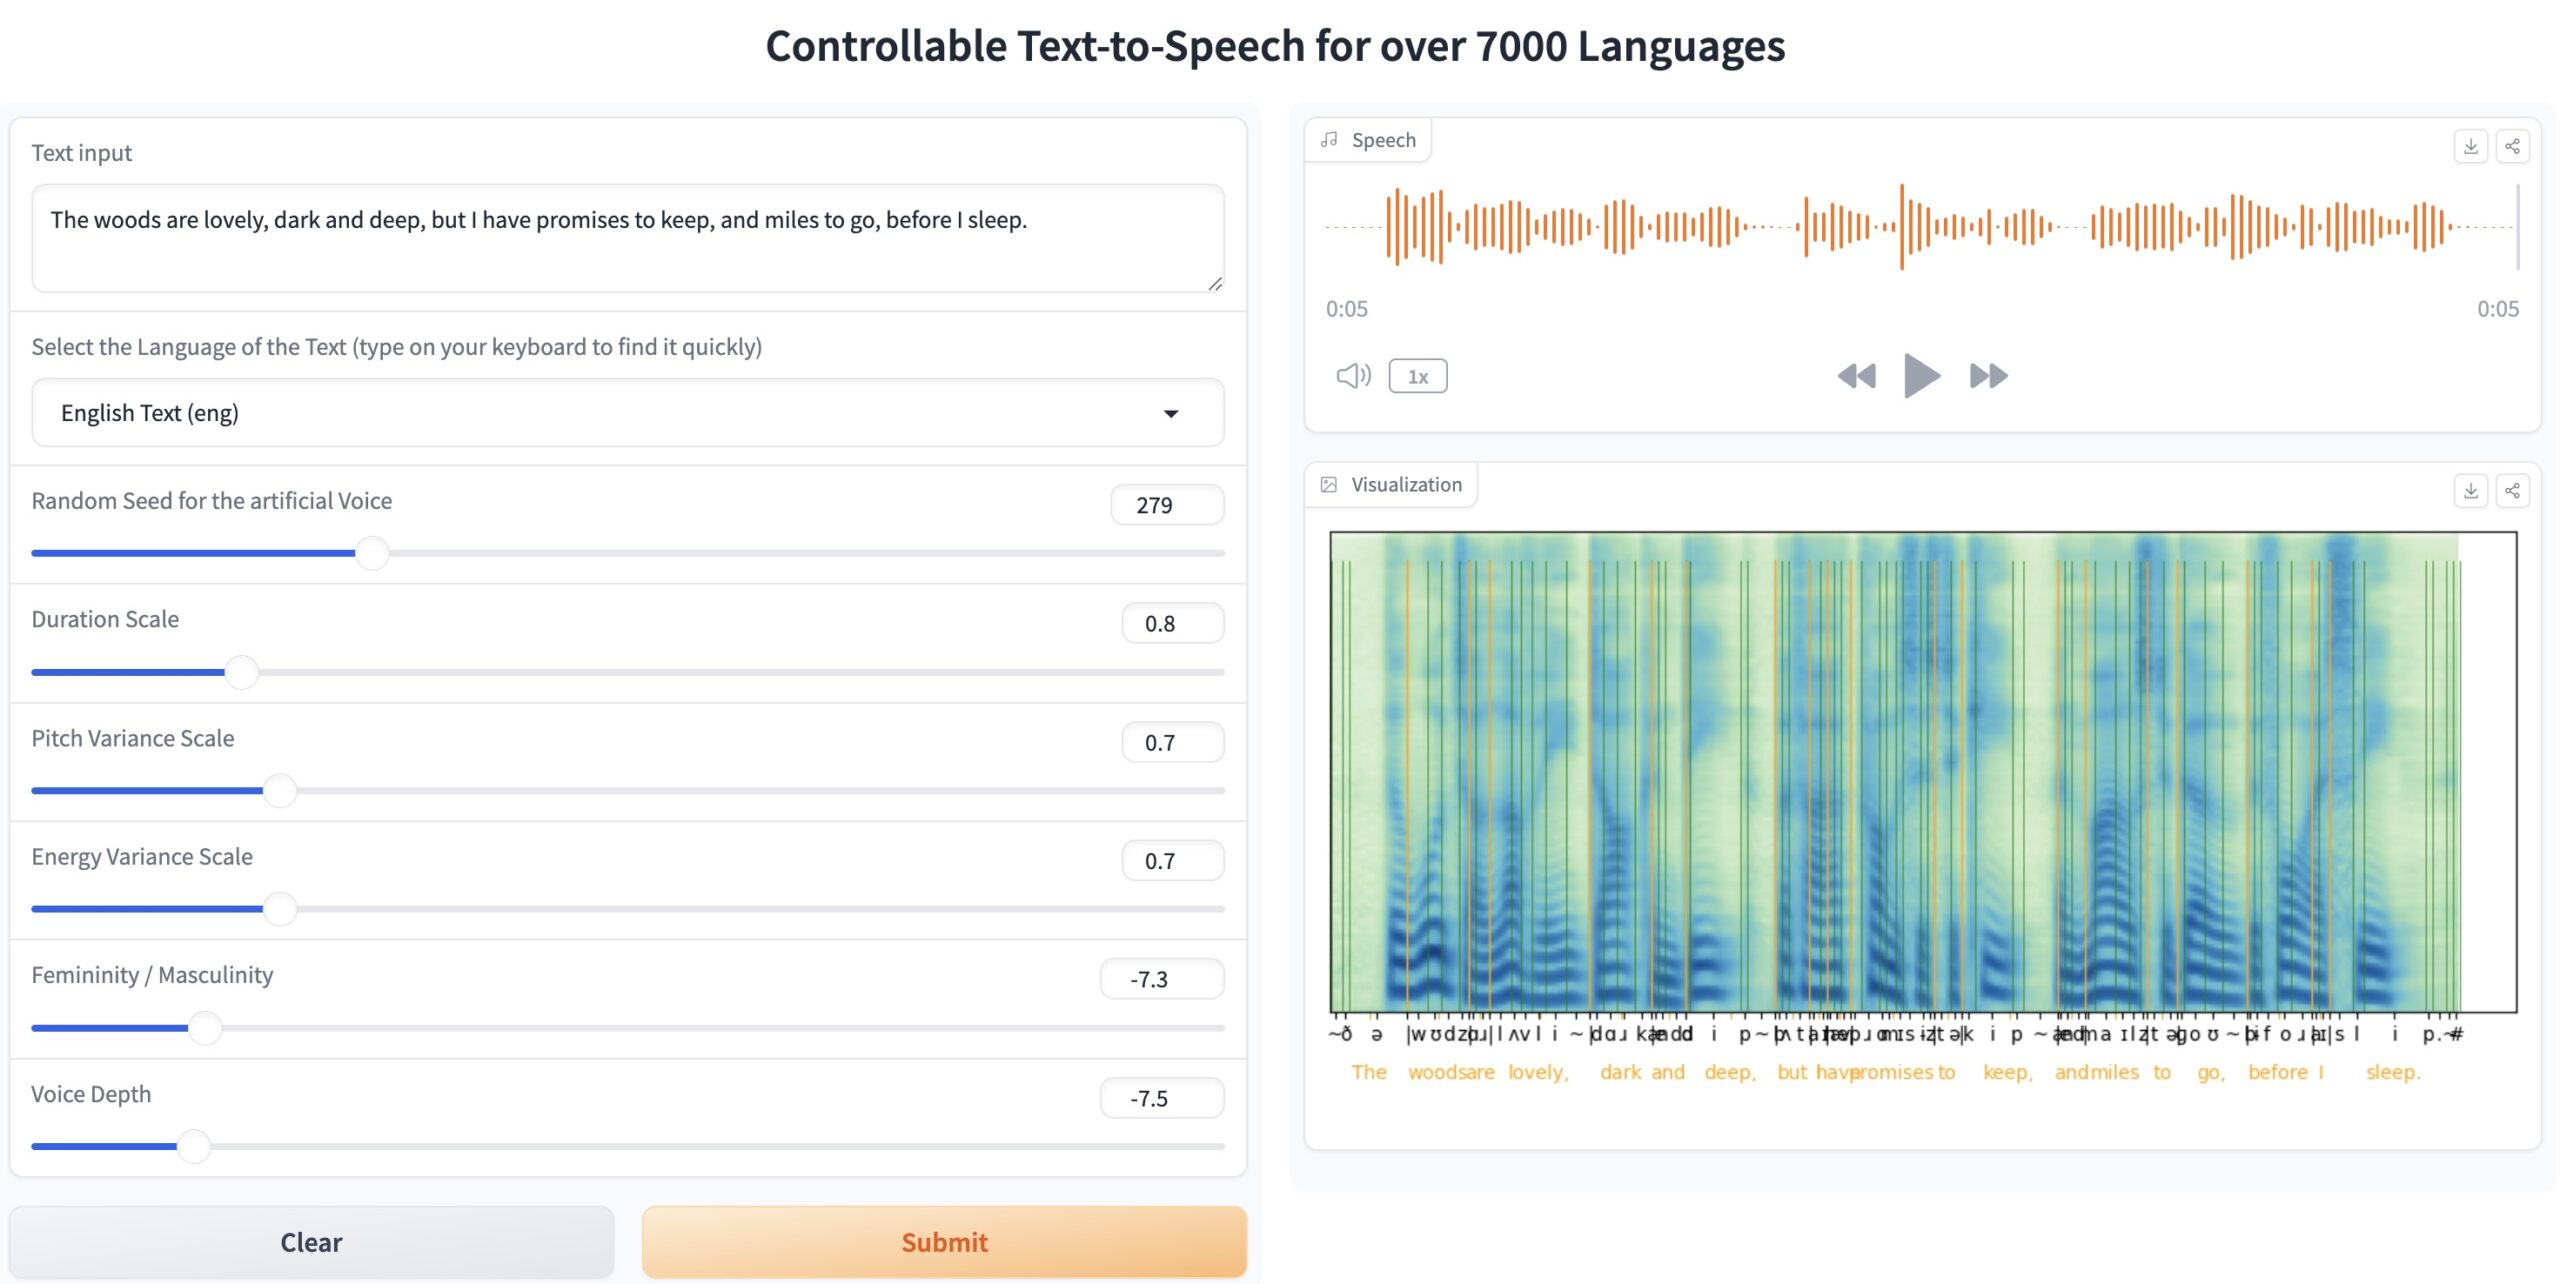 ToucanTTS: Pioneering Speech Synthesis Across 7,000 Languages